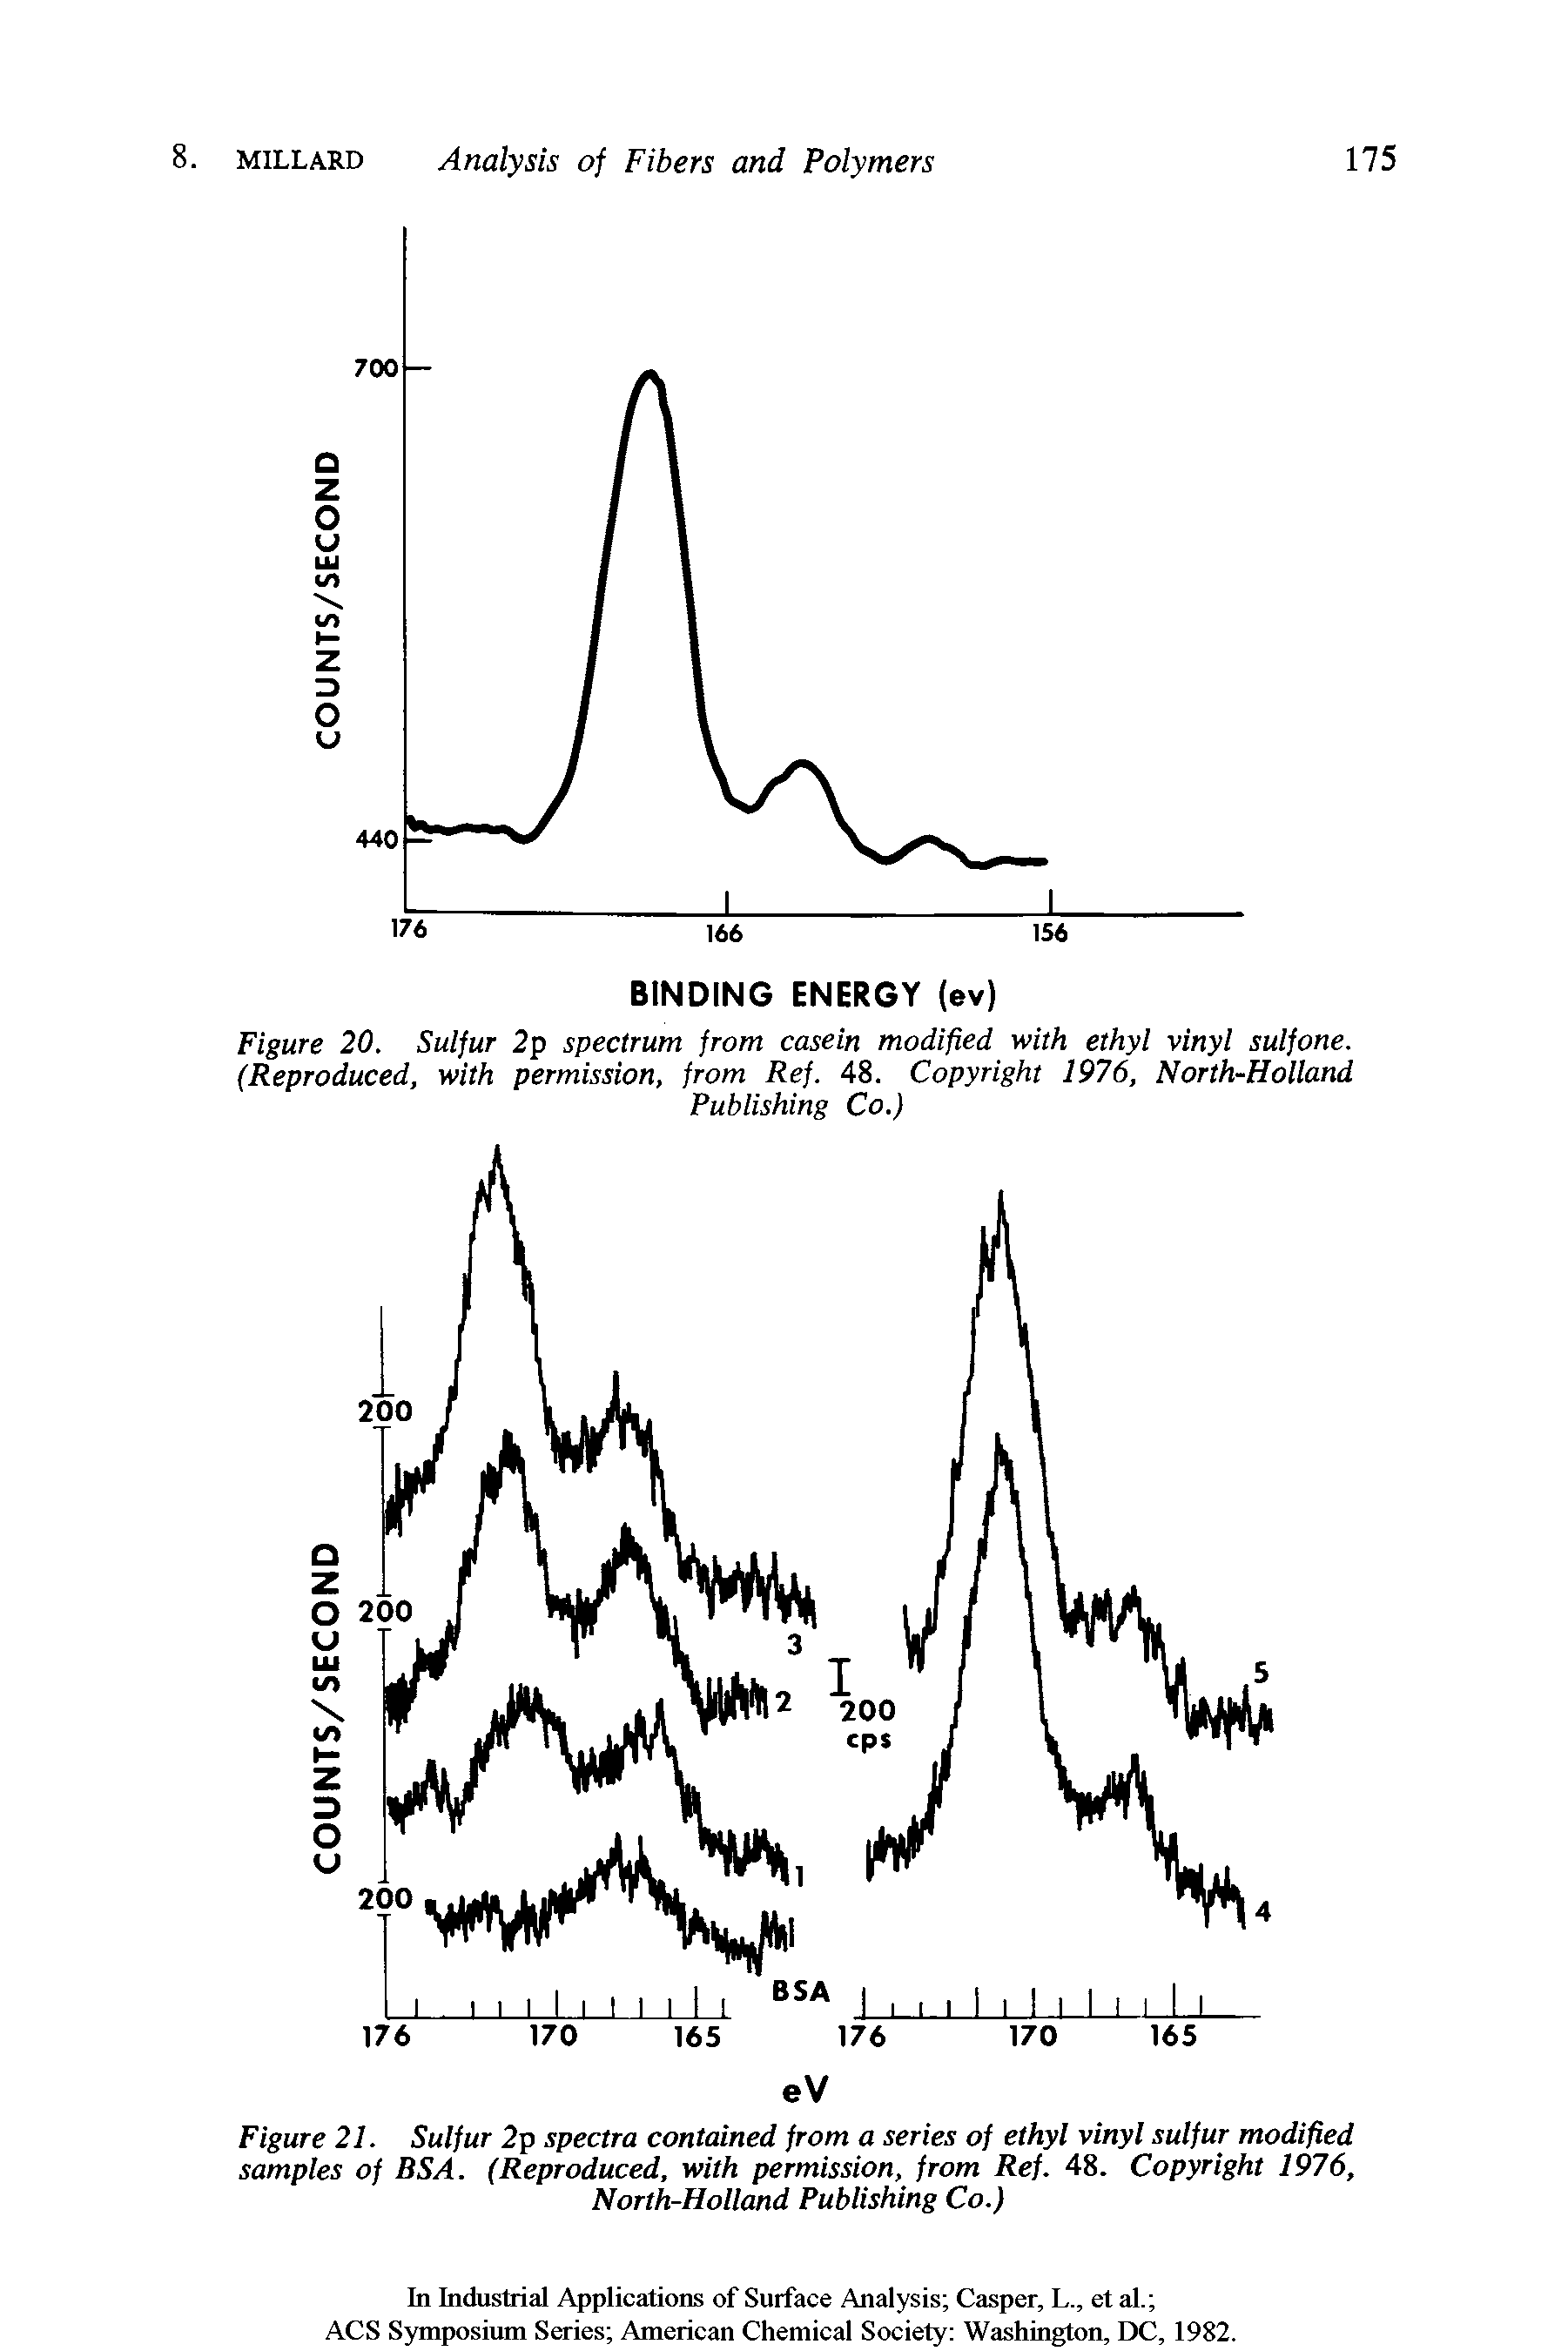 Figure 21. Sulfur 2p spectra contained from a series of ethyl vinyl sulfur modified samples of BSA. (Reproduced, with permission, from Ref. 48. Copyright 1976, North-Holland Publishing Co.)...